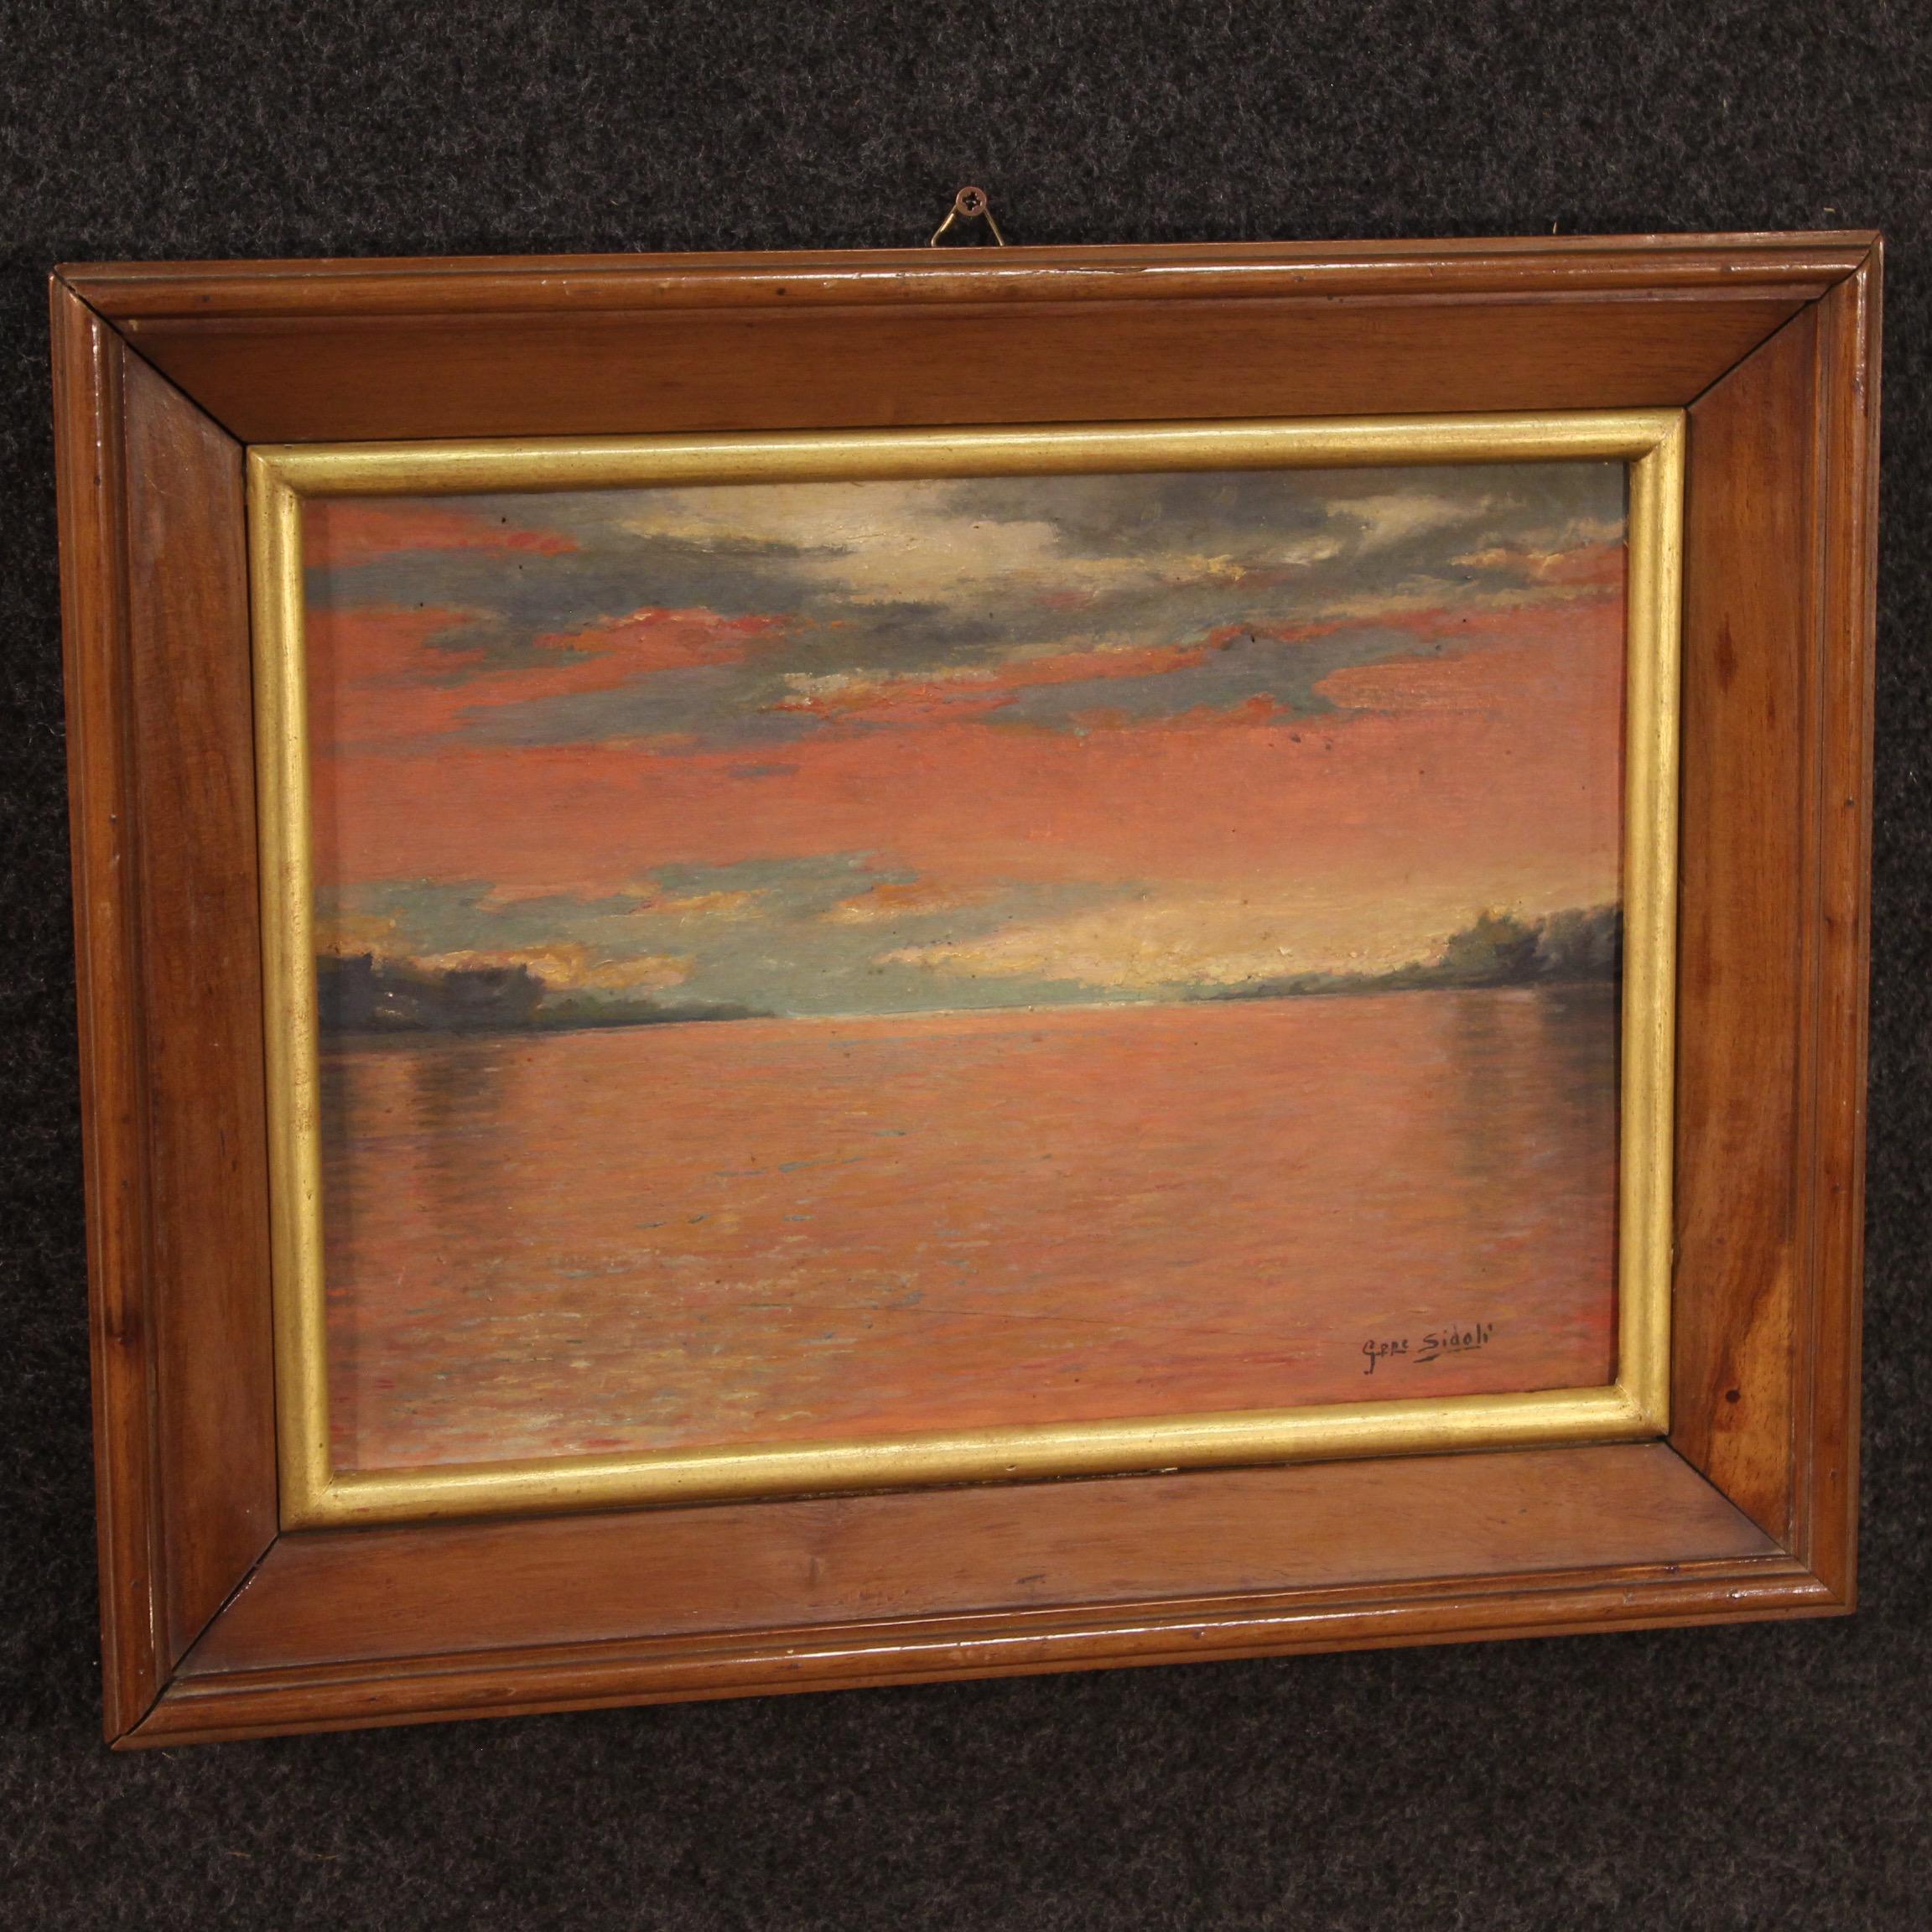 Italian painting from the first half of the 20th century. Oil framework on panel depicting a seascape at dawn of pleasant decor and good pictorial quality. Wooden frame carved with gilding decoration of beautiful decoration. Small framework, for